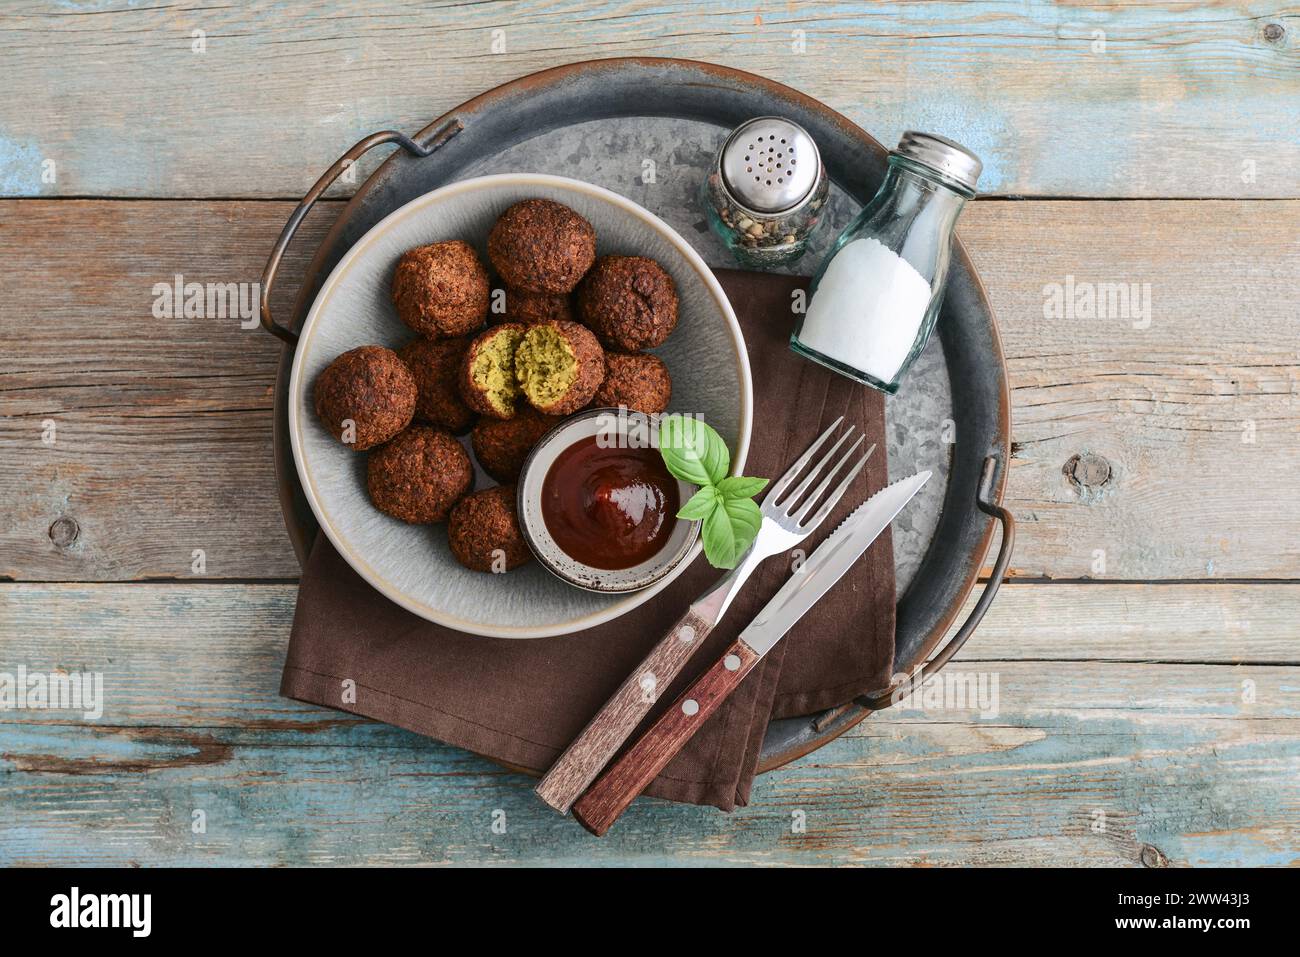 Falafel plate with spice and souce on metal tray on wooden background, top view Stock Photo